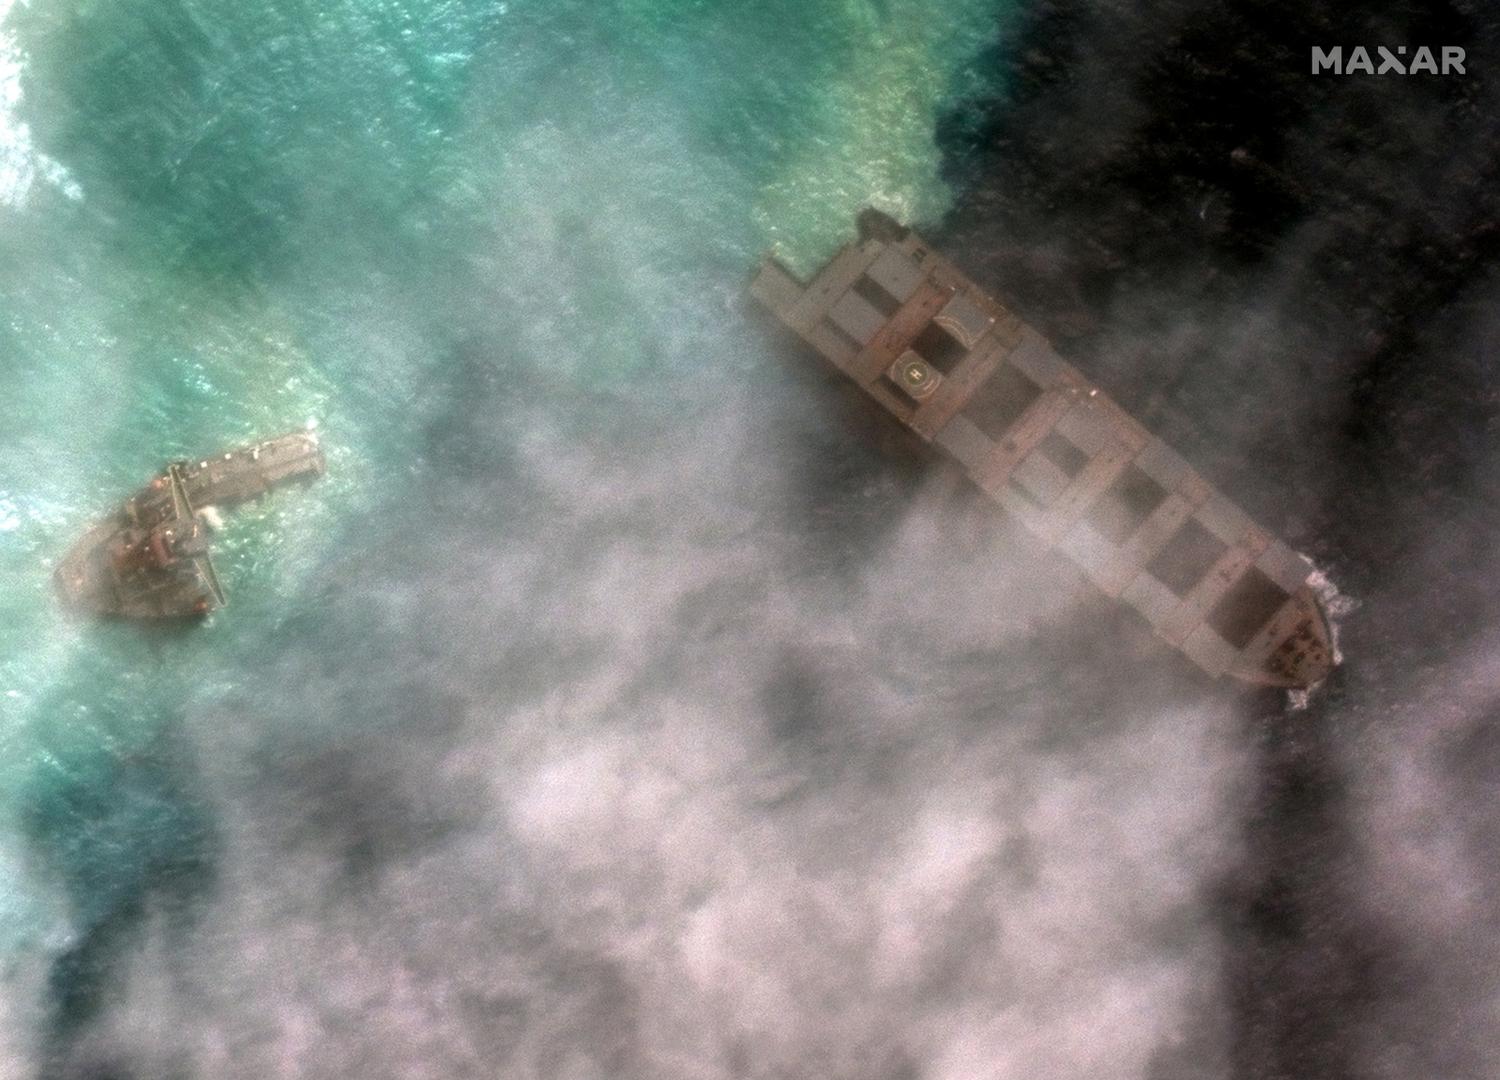 Satellite image shows Japanese bulk carrier ship MV Wakashio A satellite image shows the broken-up Japanese bulk carrier ship MV Wakashio, that ran aground on a reef last month causing an oil spill, off the coast of Pointe d'Esny, Mauritius August 15, 2020. Image taken August 15, 2020. Satellite image ©2020 Maxar Technologies/Handout via REUTERS  THIS IMAGE HAS BEEN SUPPLIED BY A THIRD PARTY. MANDATORY CREDIT. MUST NOT OBSCURE WATERMARK. NO RESALES. NO ARCHIVES MAXAR TECHNOLOGIES